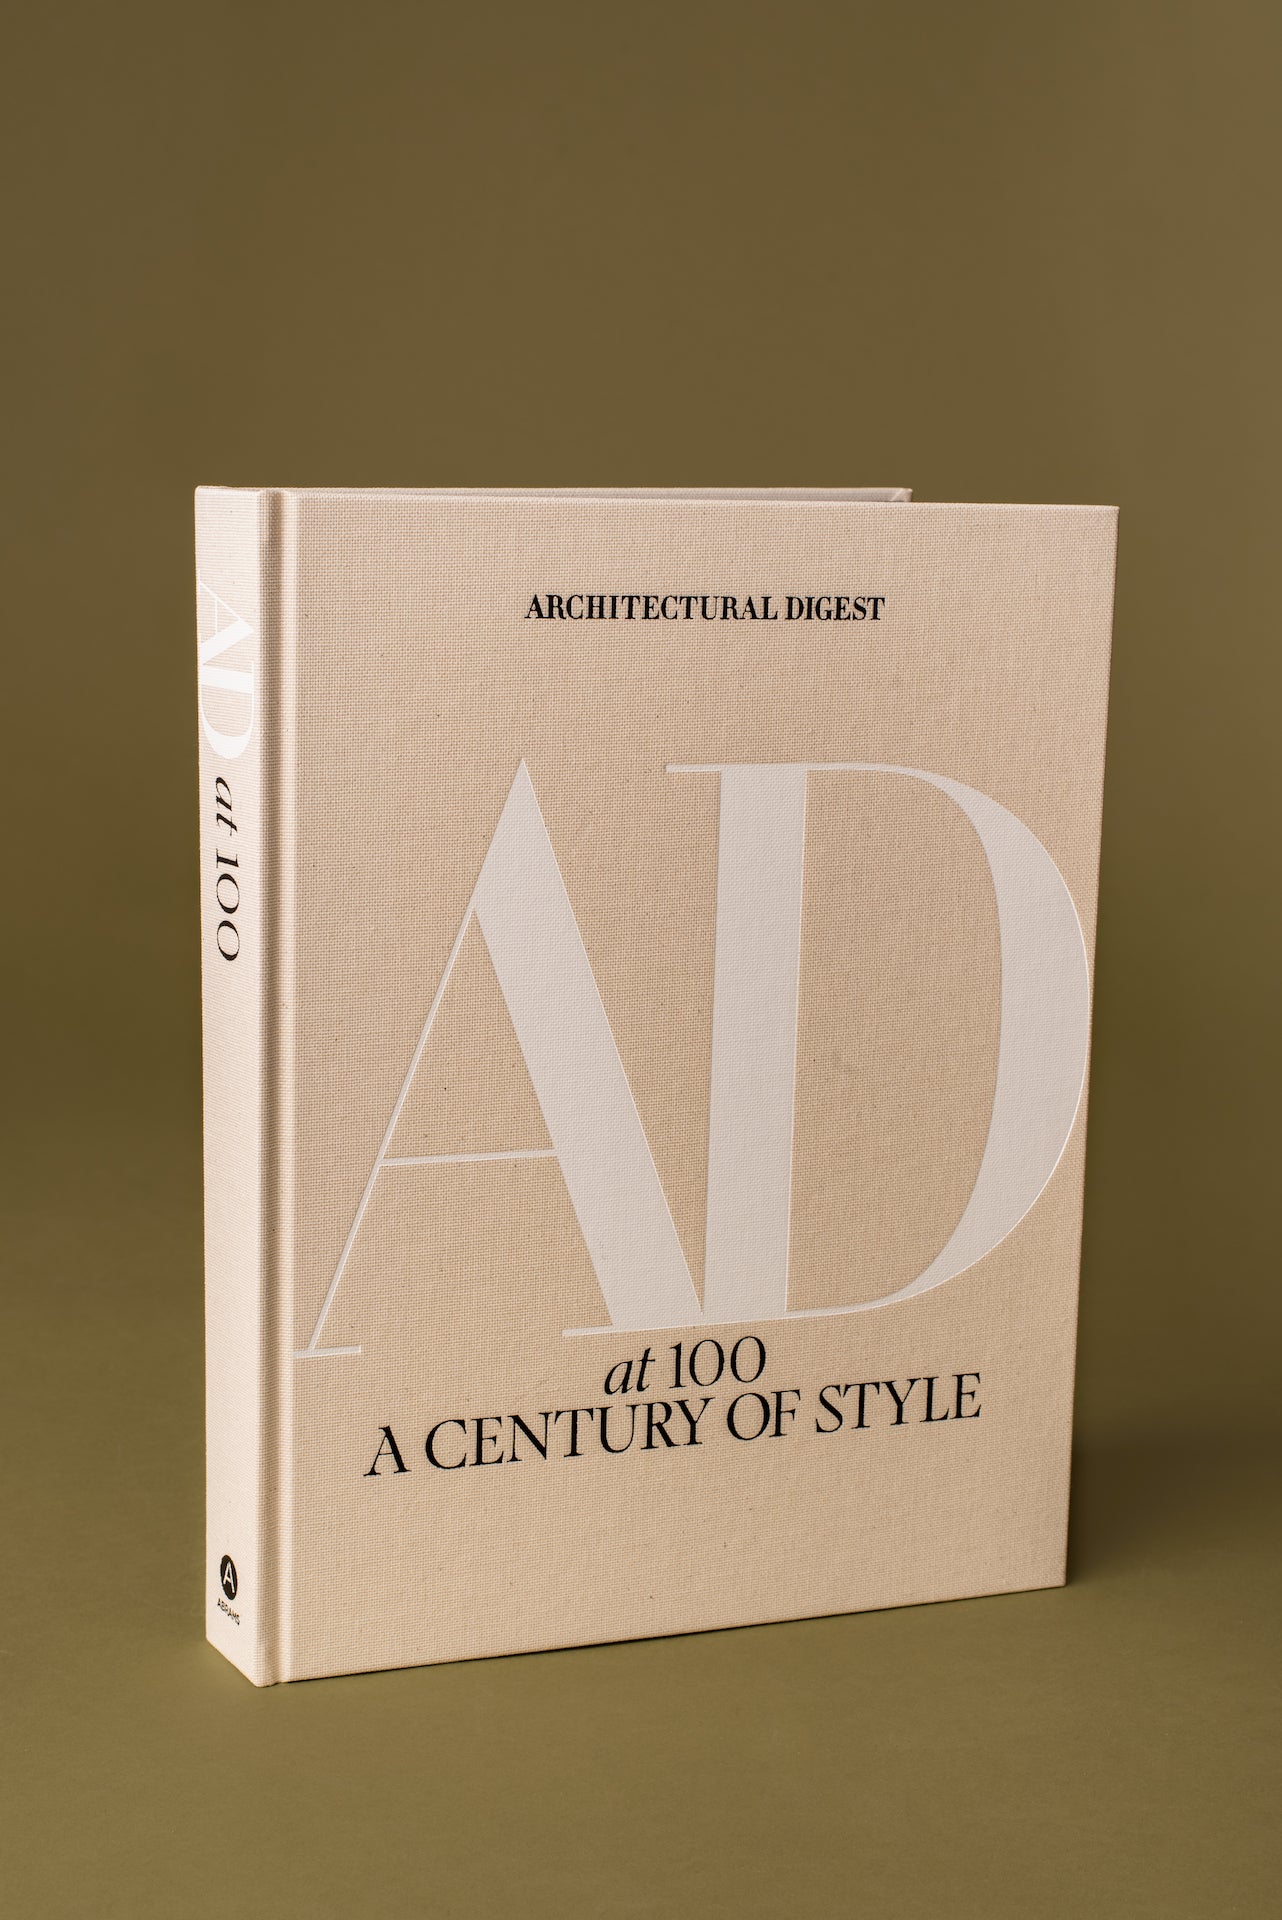 Architectural Digest at 100: A Century of Style - Joy Meets Home